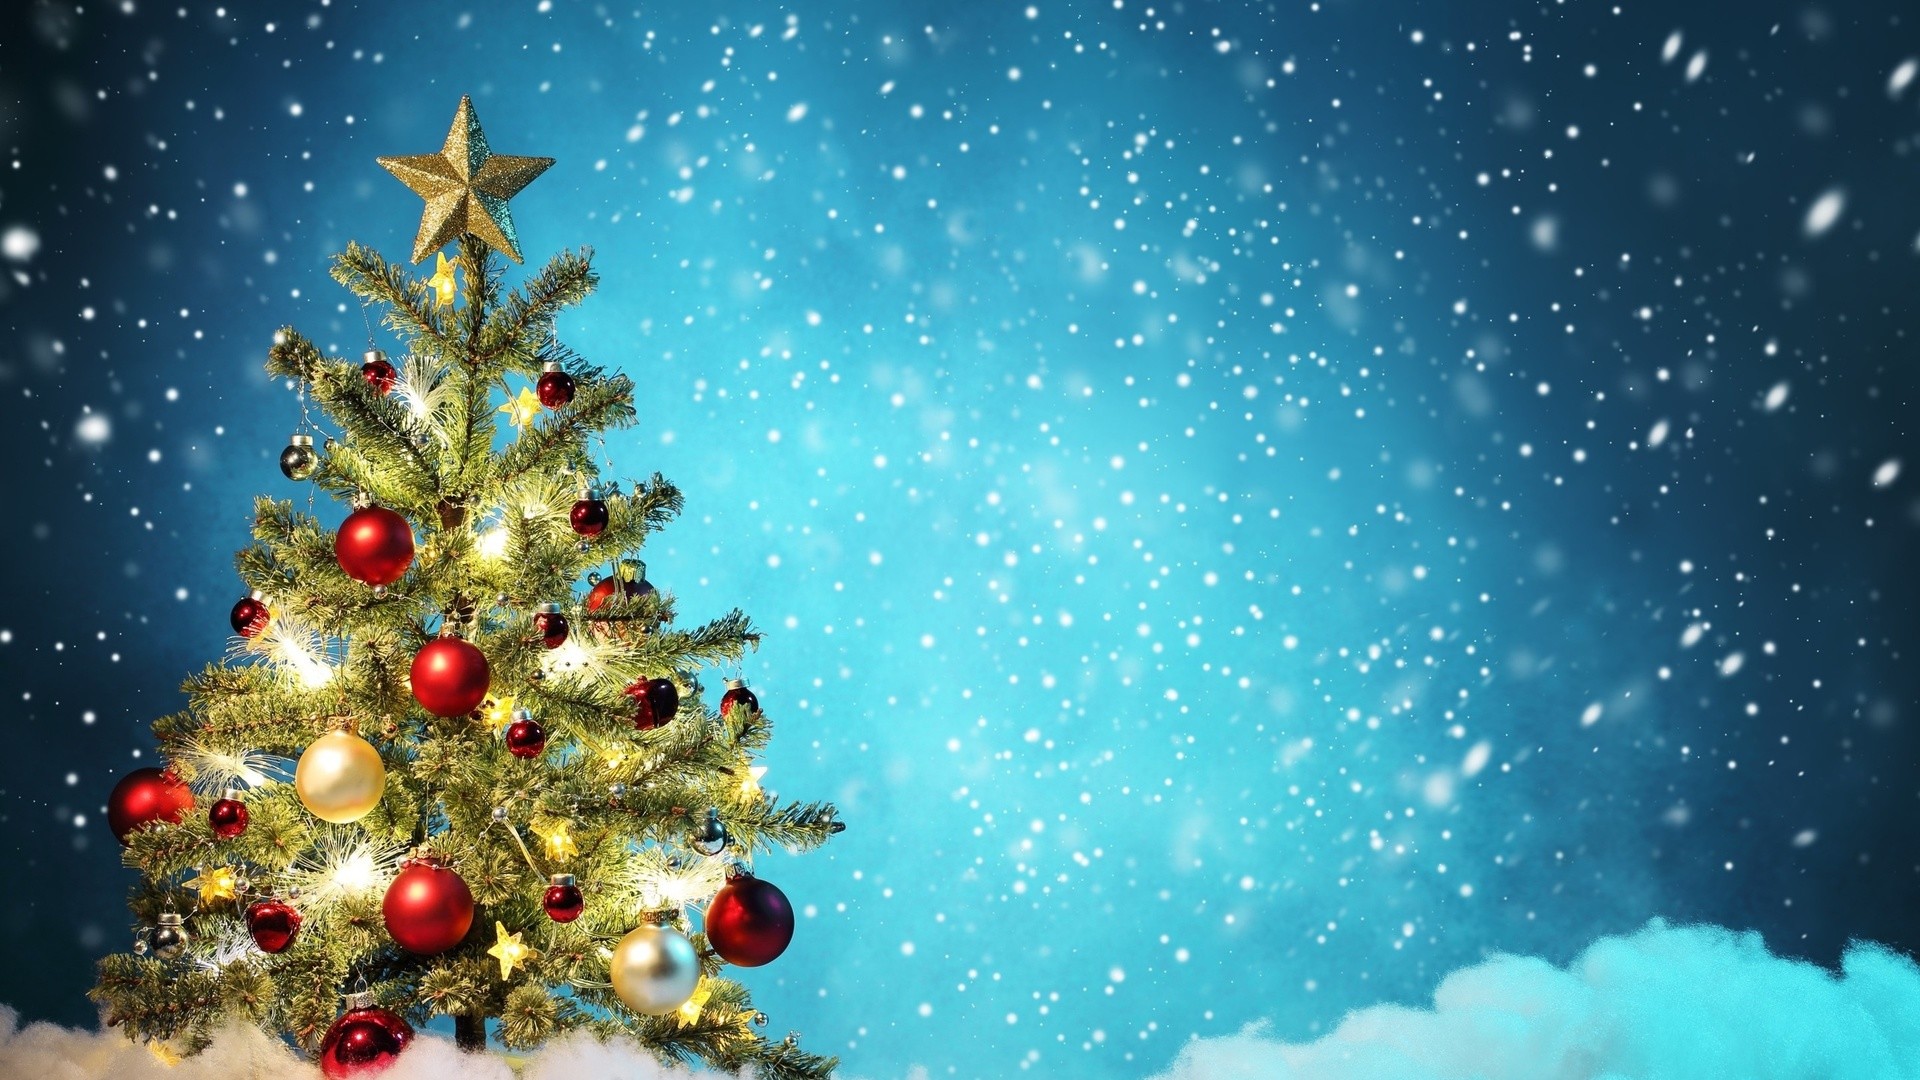 1920x1080 Christmas tree wallpapers (19 Wallpapers)